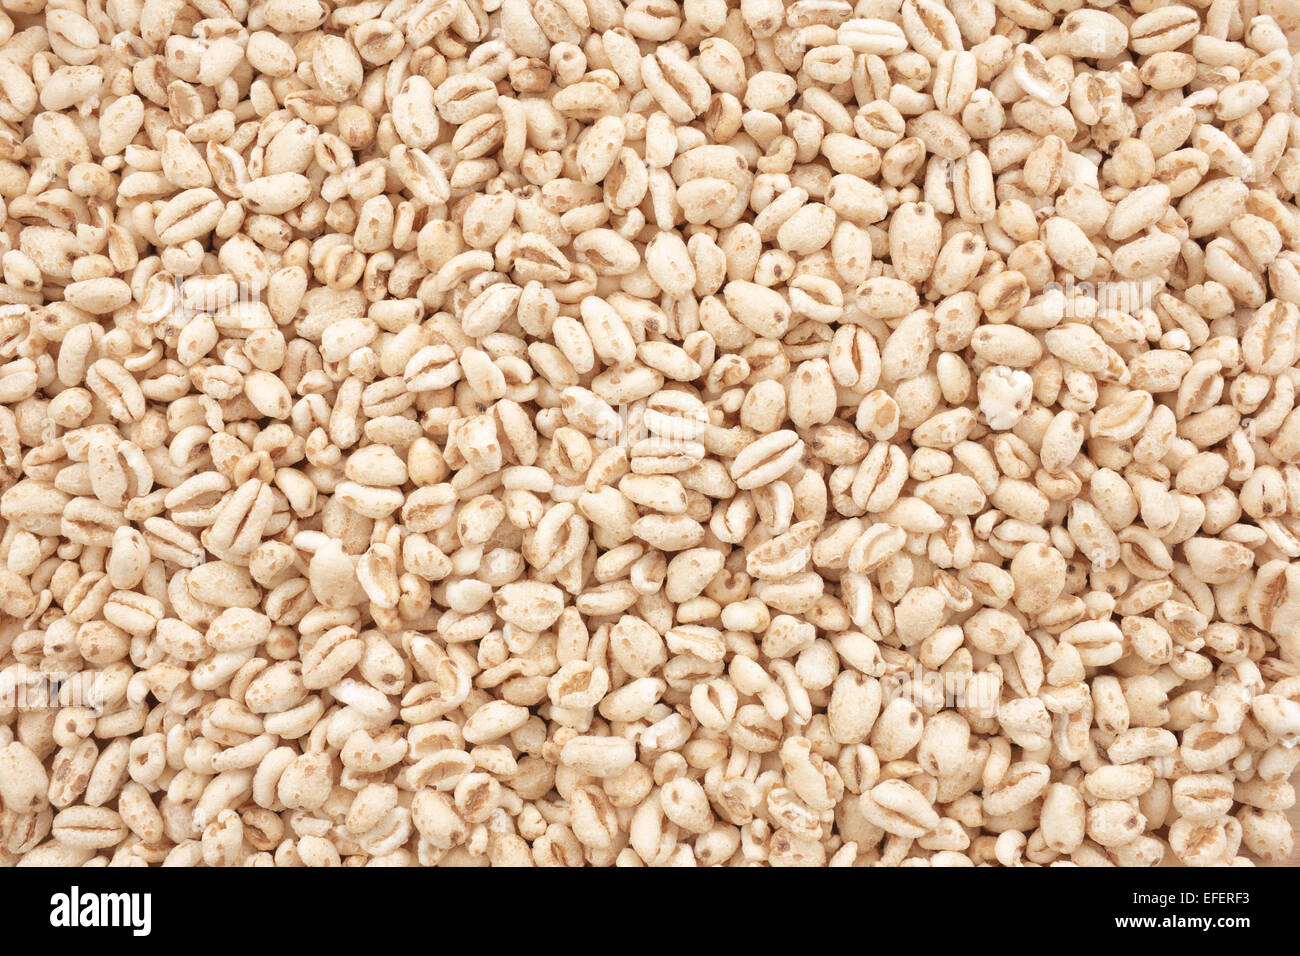 View from above of puffed wheat cereal. Stock Photo